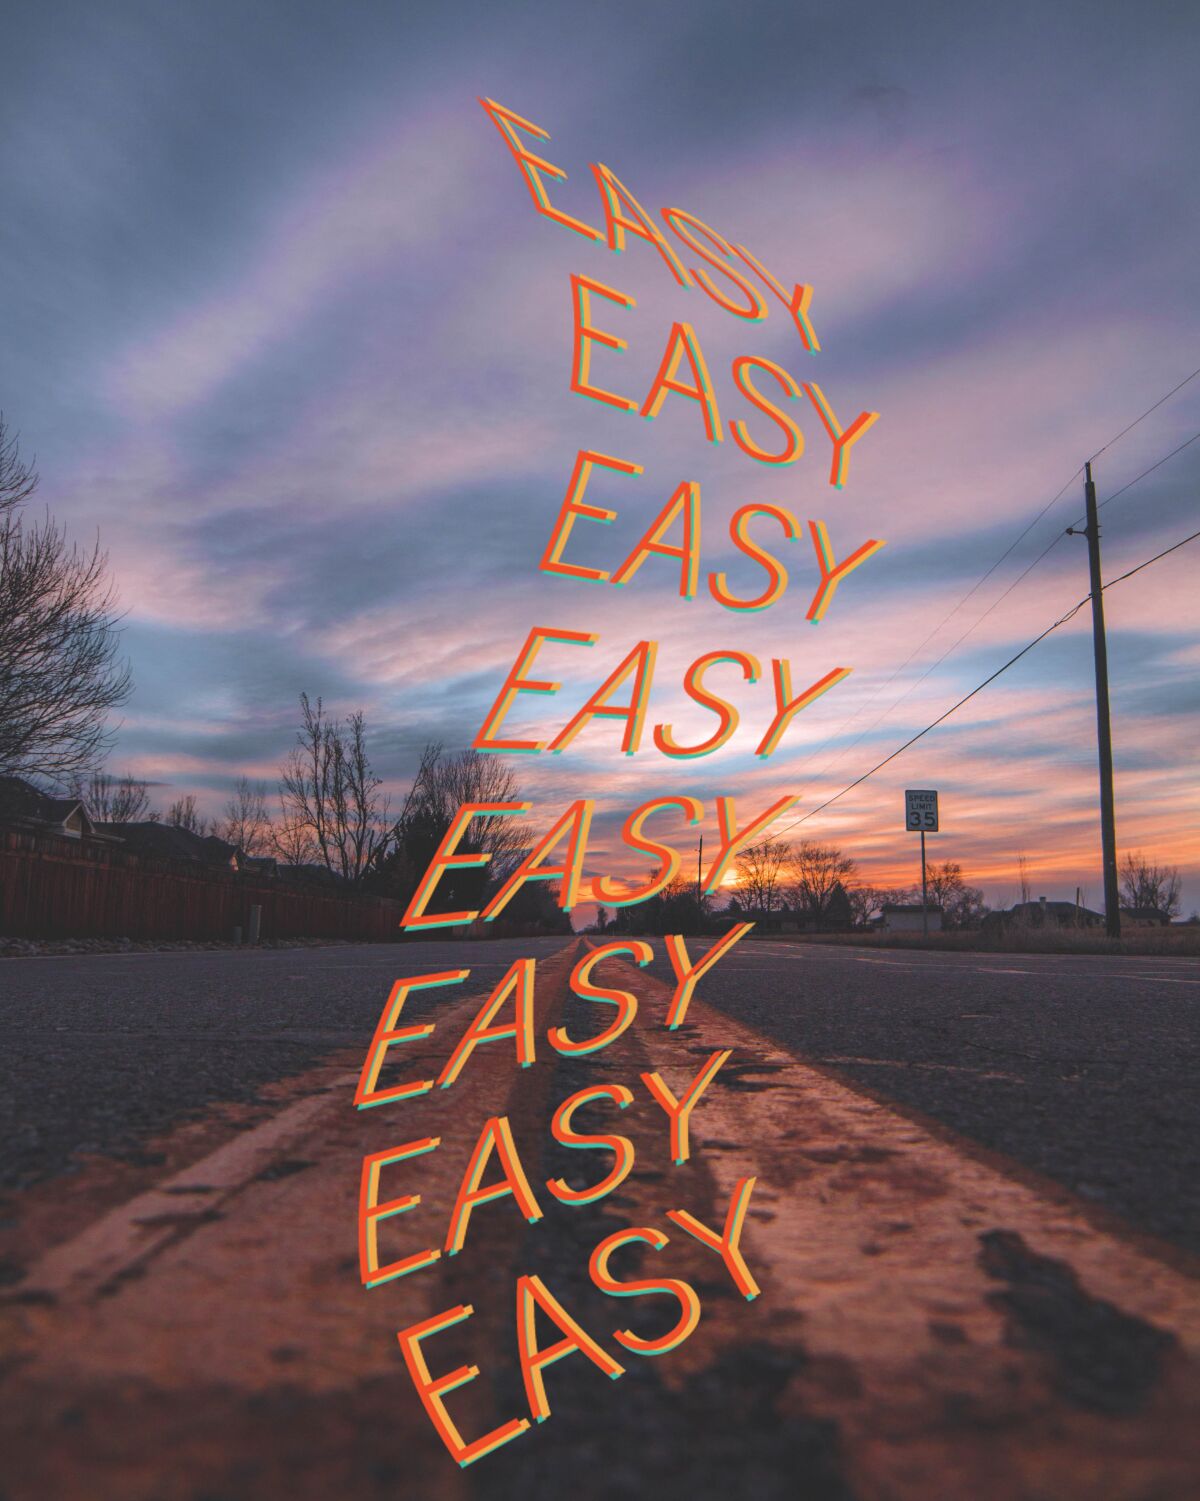 Photo of a stretch of road as the sun rises. The word "Easy" is repeated on top of the image.